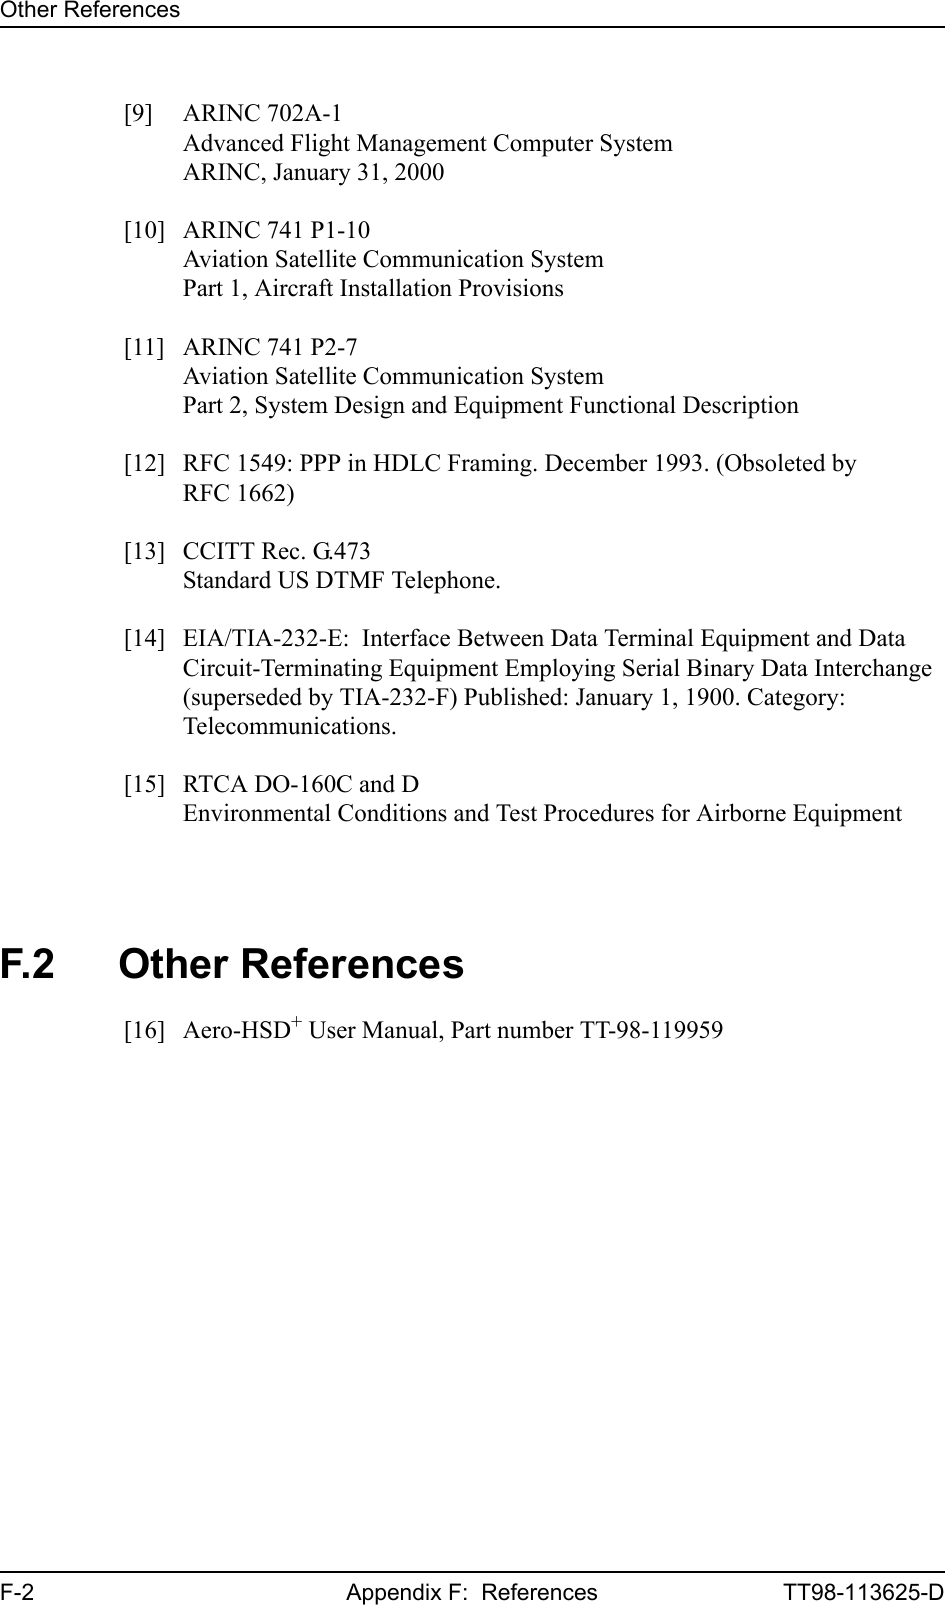 Other ReferencesF-2 Appendix F:  References TT98-113625-D[9] ARINC 702A-1Advanced Flight Management Computer SystemARINC, January 31, 2000[10] ARINC 741 P1-10Aviation Satellite Communication SystemPart 1, Aircraft Installation Provisions[11] ARINC 741 P2-7Aviation Satellite Communication SystemPart 2, System Design and Equipment Functional Description[12] RFC 1549: PPP in HDLC Framing. December 1993. (Obsoleted by RFC 1662)[13] CCITT Rec. G.473Standard US DTMF Telephone.[14] EIA/TIA-232-E:  Interface Between Data Terminal Equipment and Data Circuit-Terminating Equipment Employing Serial Binary Data Interchange (superseded by TIA-232-F) Published: January 1, 1900. Category: Telecommunications.[15] RTCA DO-160C and DEnvironmental Conditions and Test Procedures for Airborne EquipmentF.2 Other References[16] Aero-HSD+ User Manual, Part number TT-98-119959